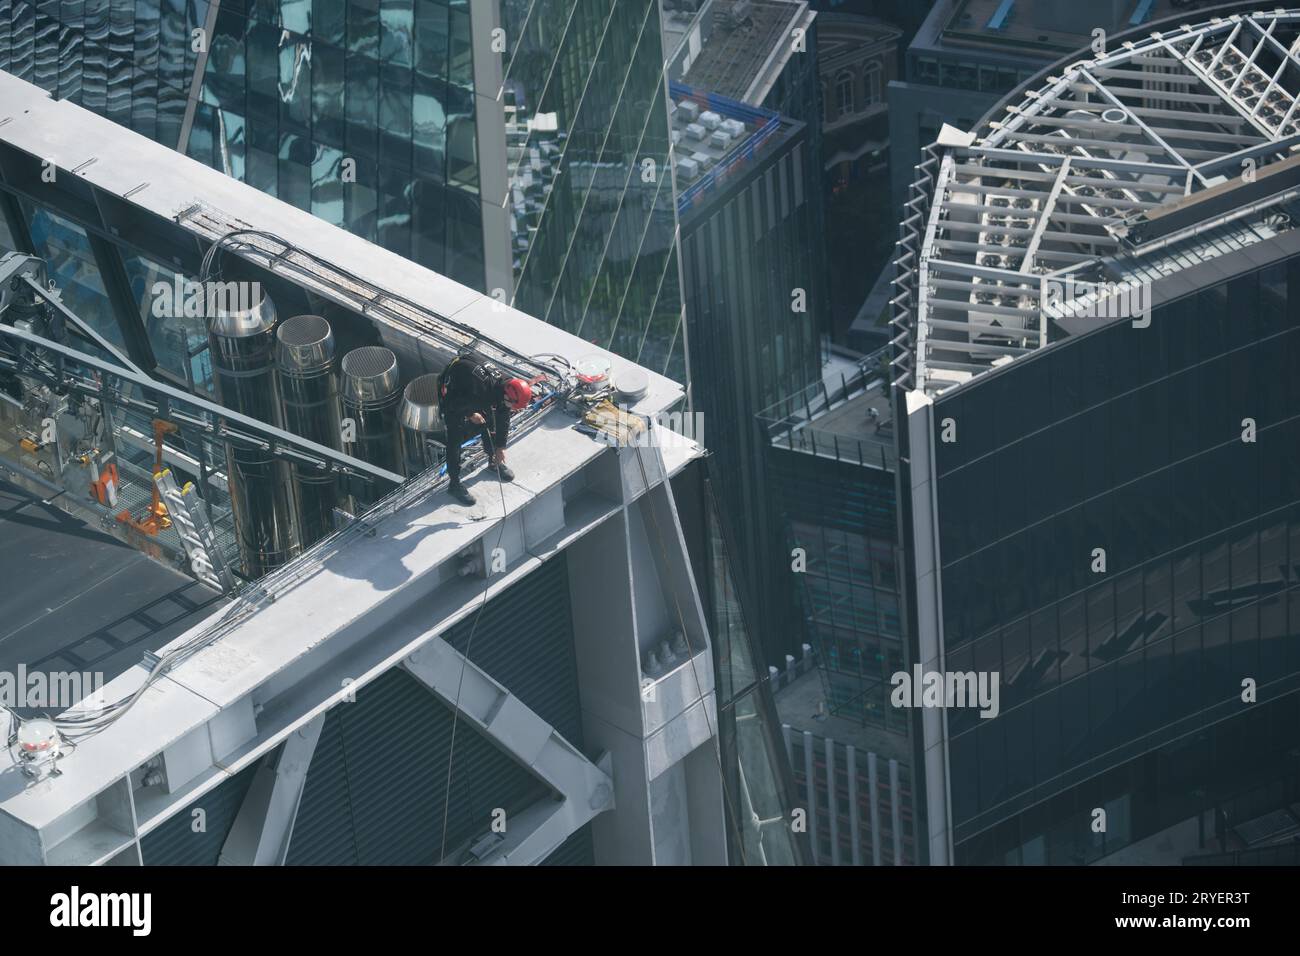 A climber on top of a skyscraper prepares to clean it Stock Photo